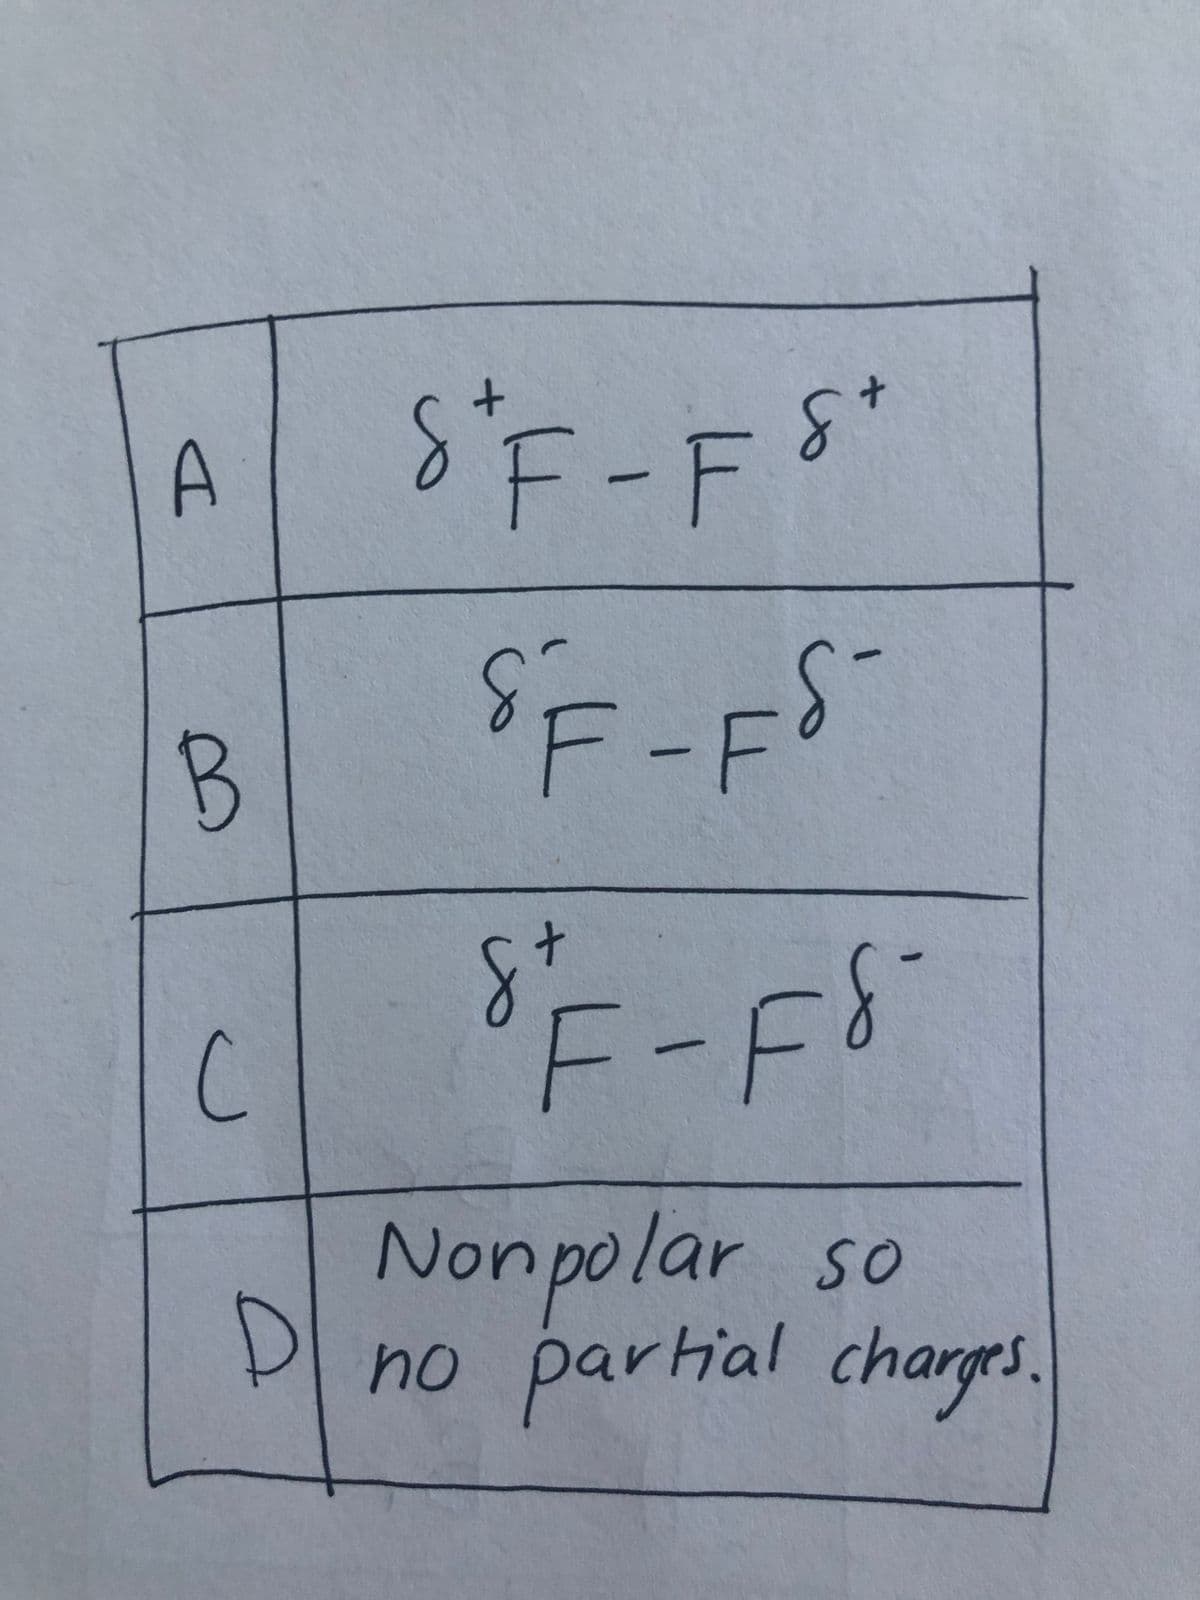 A
F-F
F-FS
C
-F-
Nonpolar
sO
no partial charges.
3
